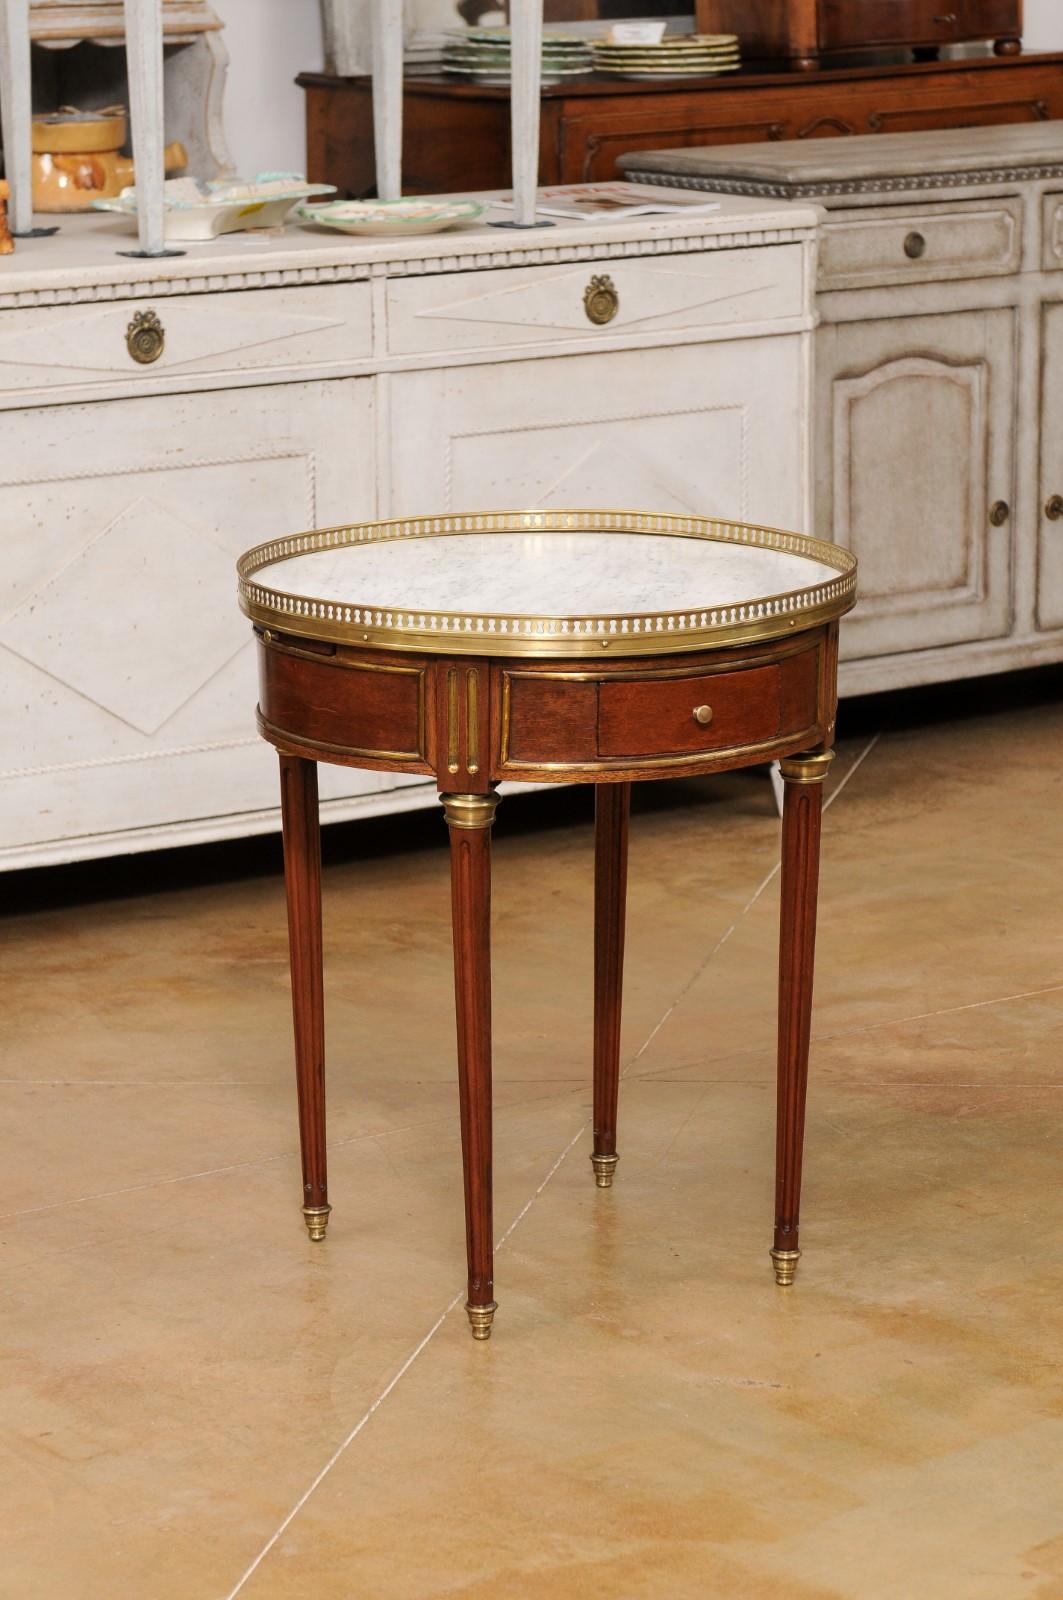 A French Louis XVI style bouillotte table from the 19th century with white marble top, brass gallery, drawers and fluted legs. Created in France during the last decade of the 19th century, this elegant bouillotte table features a white veined marble